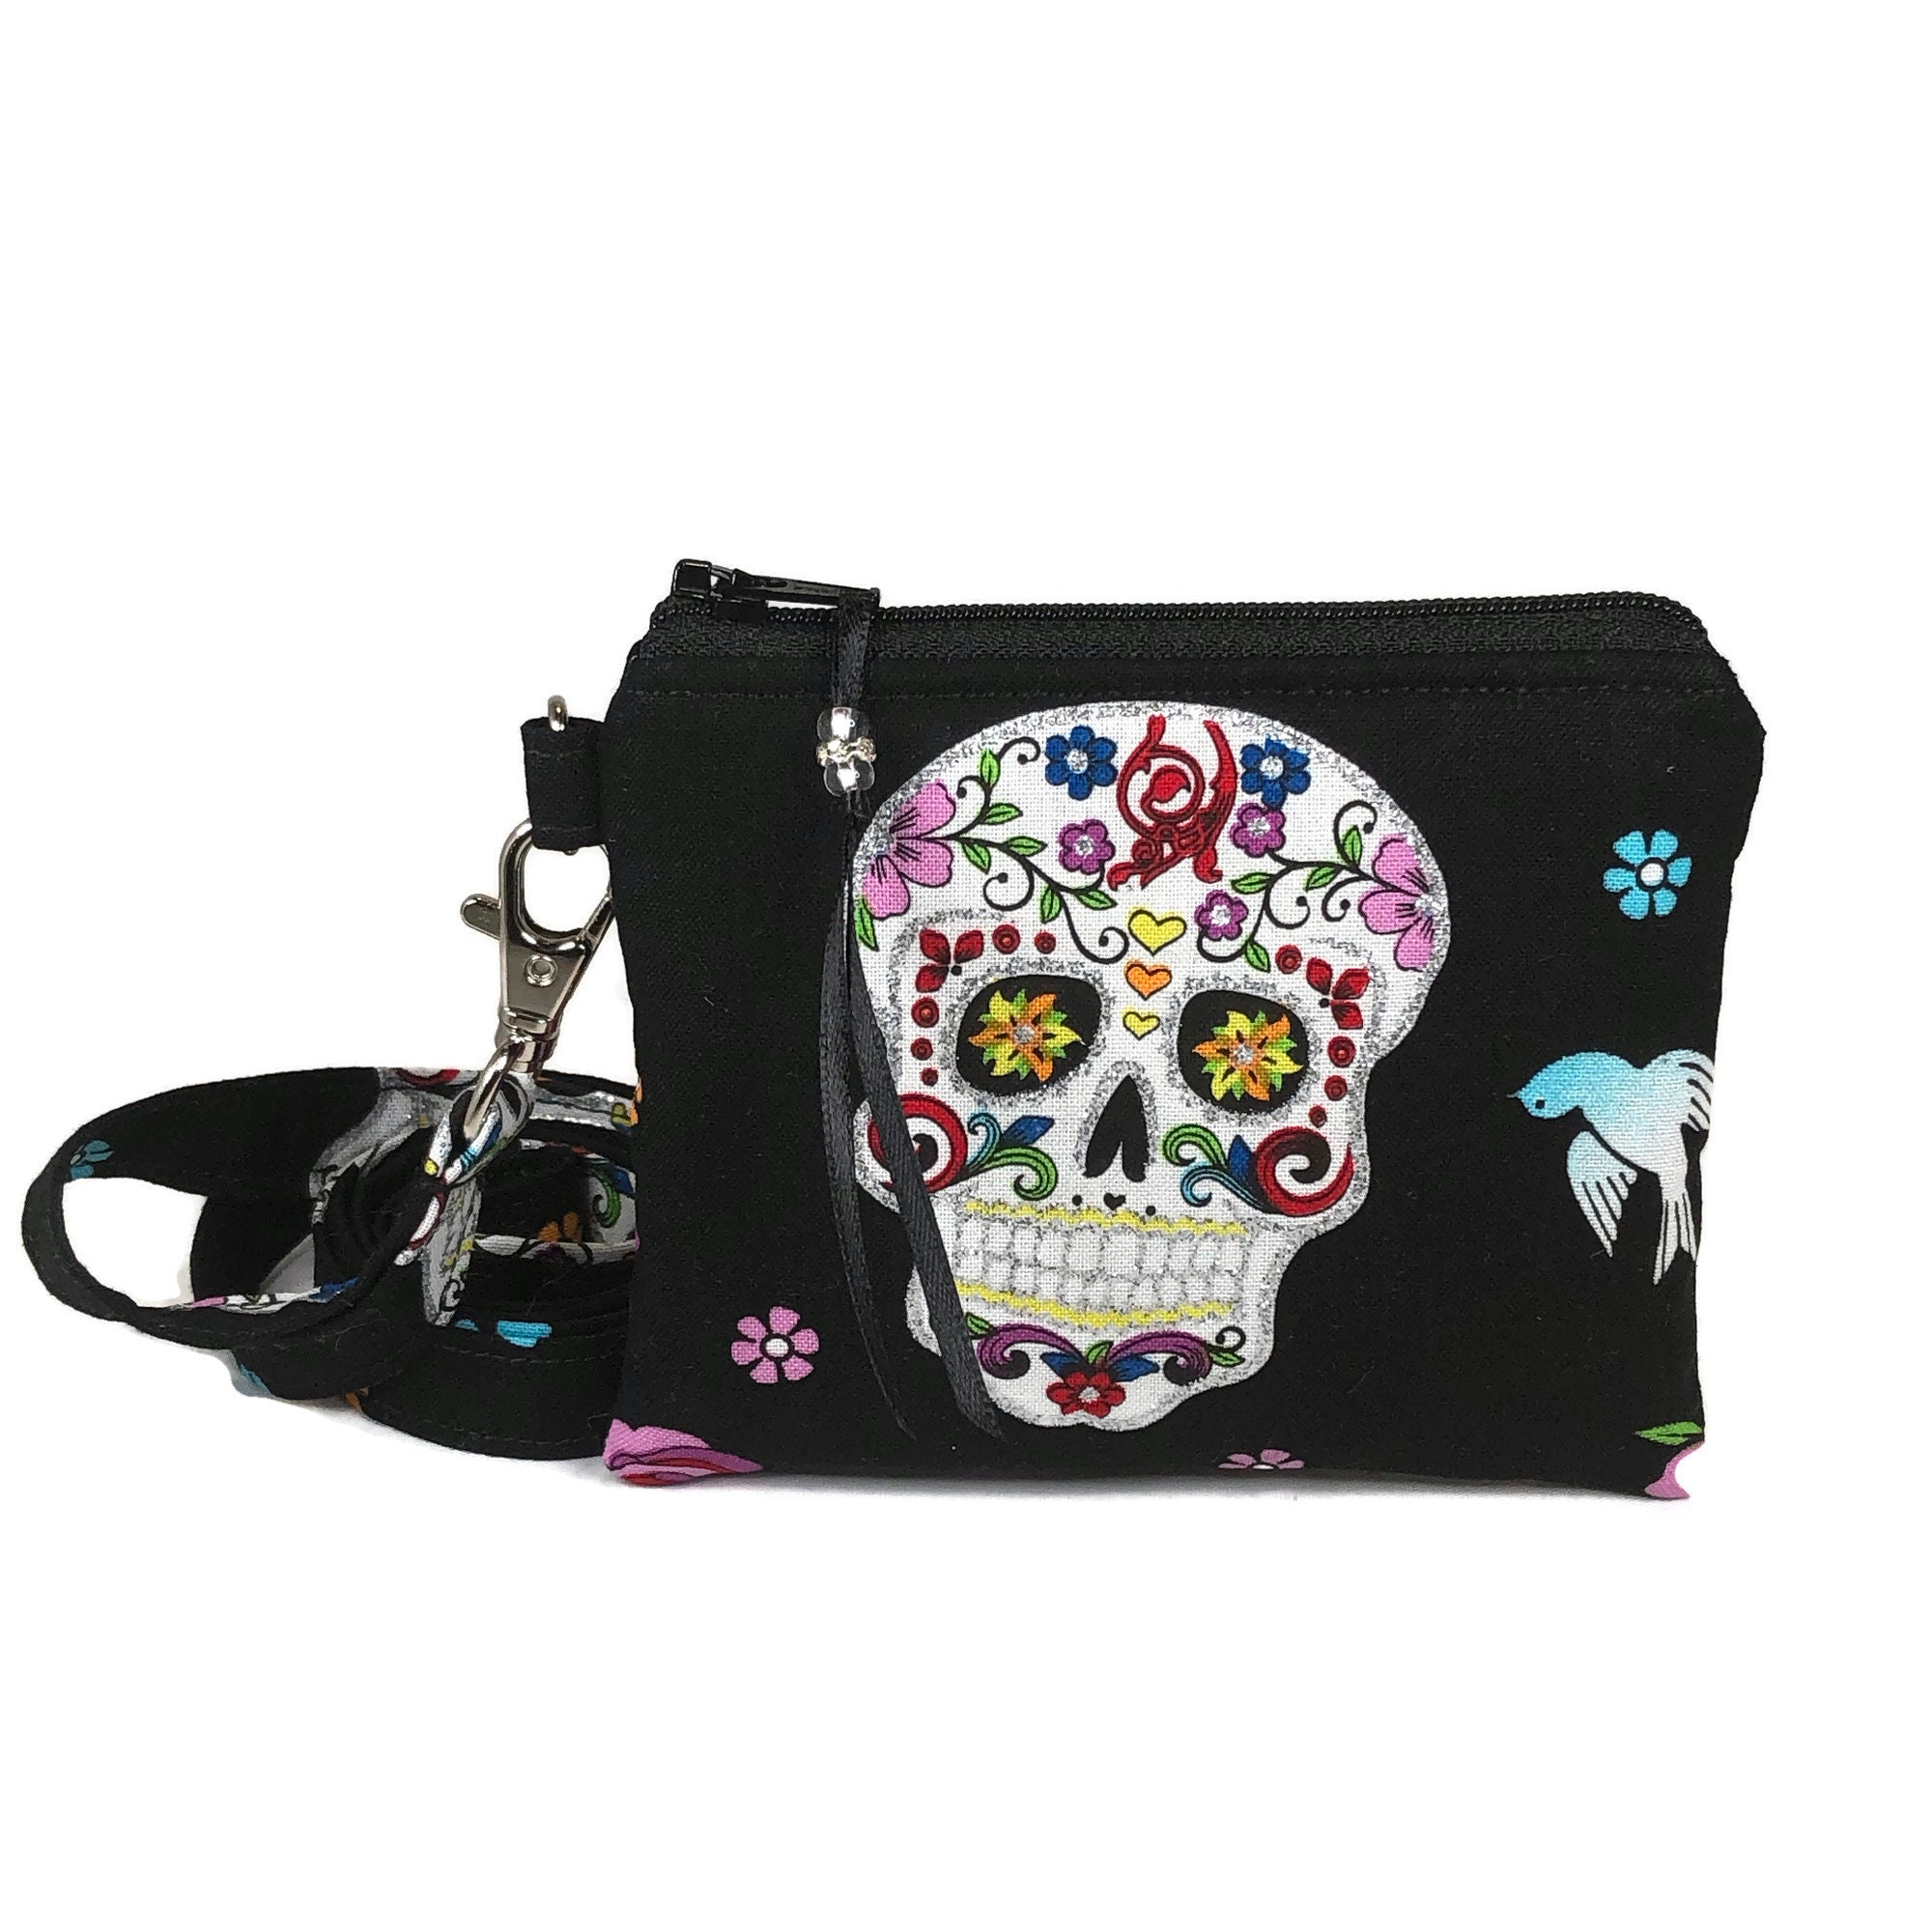 QIEARA Sugar Skull and Roses Buckle Coin Purses Pouch Clasp Closure Change Wallets Gifts for Women Key Holder 